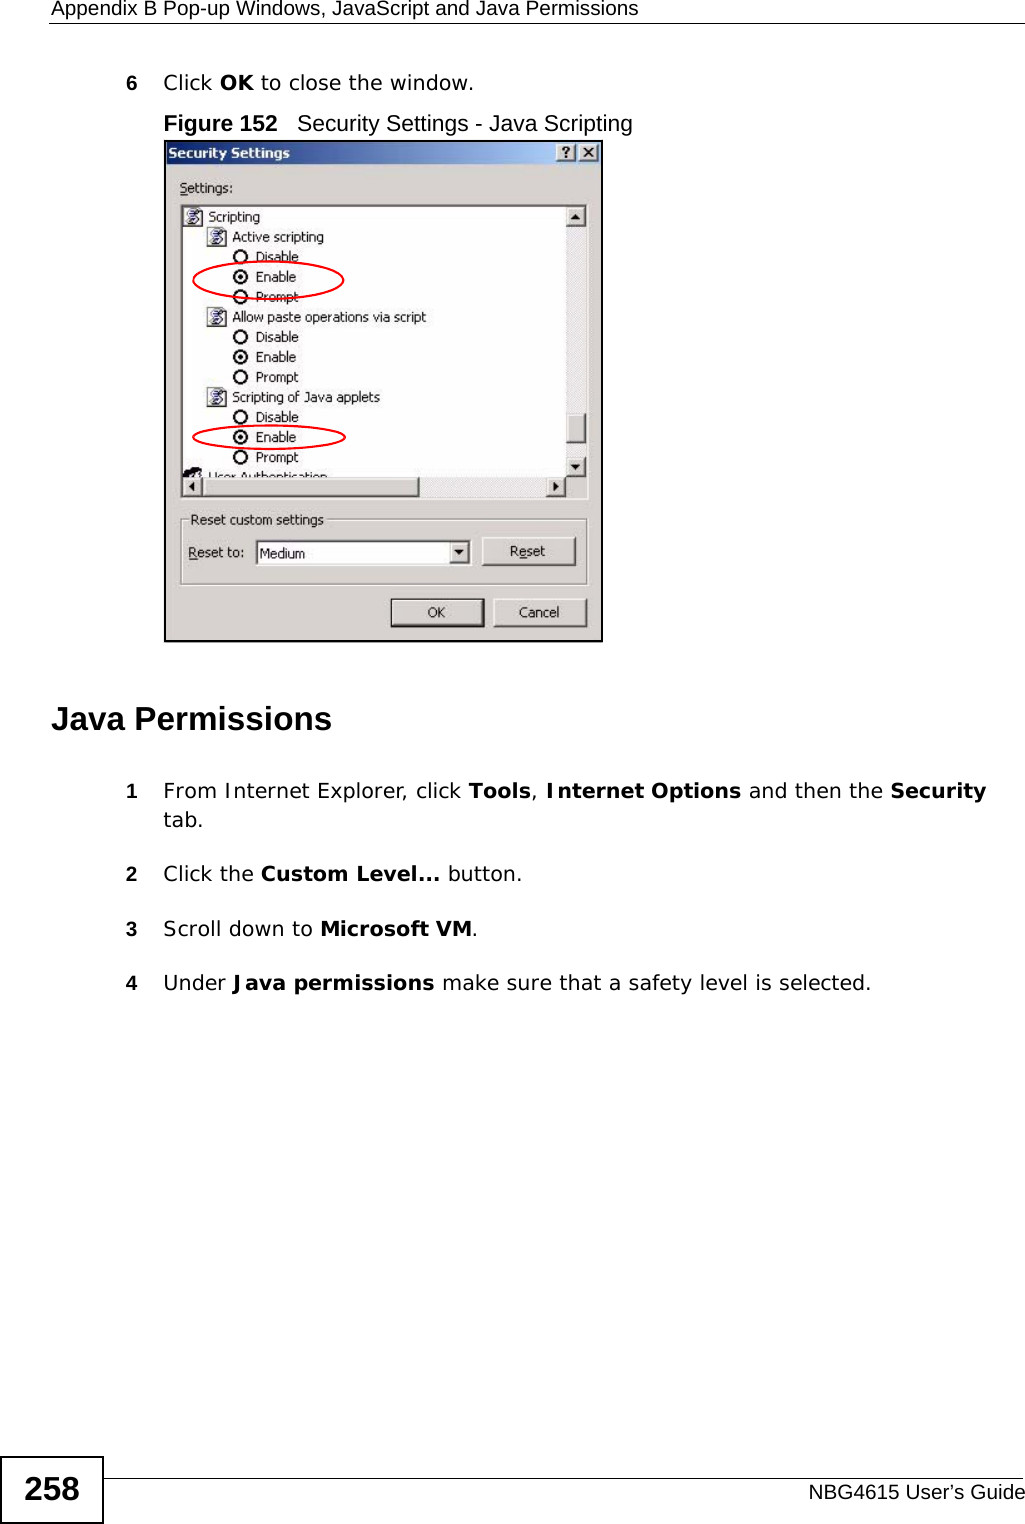 Appendix B Pop-up Windows, JavaScript and Java PermissionsNBG4615 User’s Guide2586Click OK to close the window.Figure 152   Security Settings - Java ScriptingJava Permissions1From Internet Explorer, click Tools, Internet Options and then the Security tab. 2Click the Custom Level... button. 3Scroll down to Microsoft VM. 4Under Java permissions make sure that a safety level is selected.